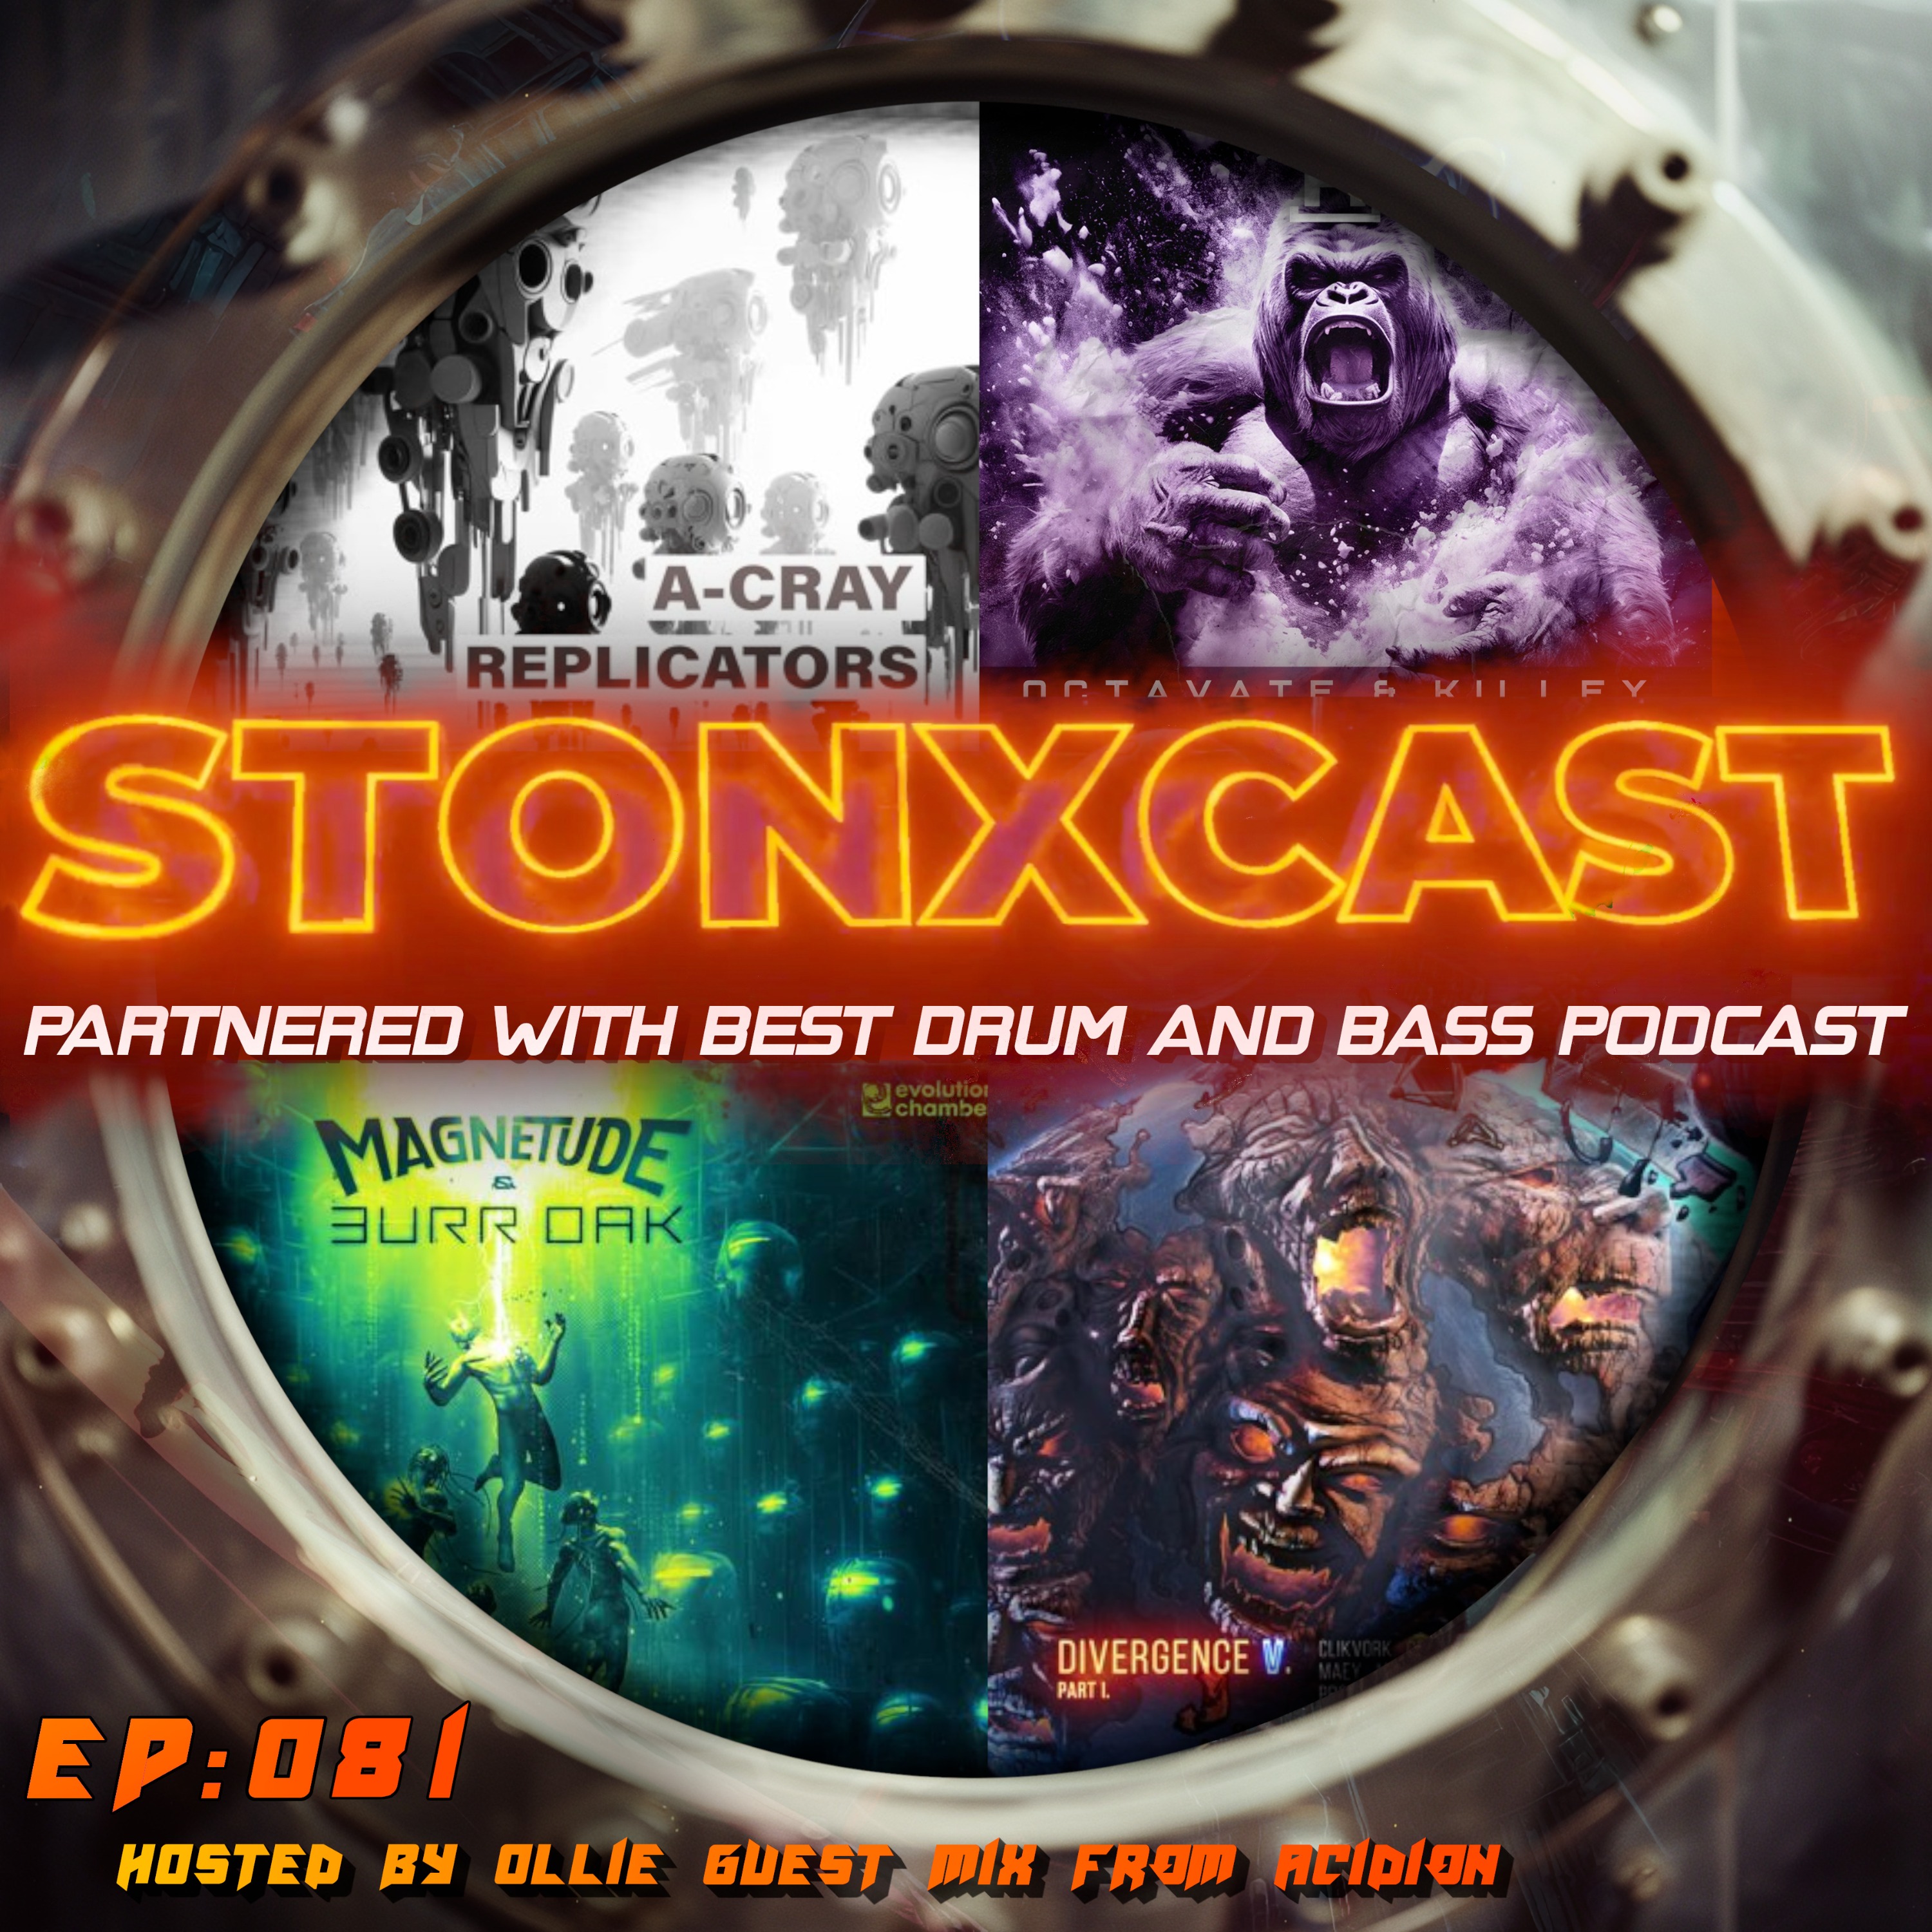 Stonxcast EP:081 - Hosted by Ollie Guest Mix from Acidion Artwork